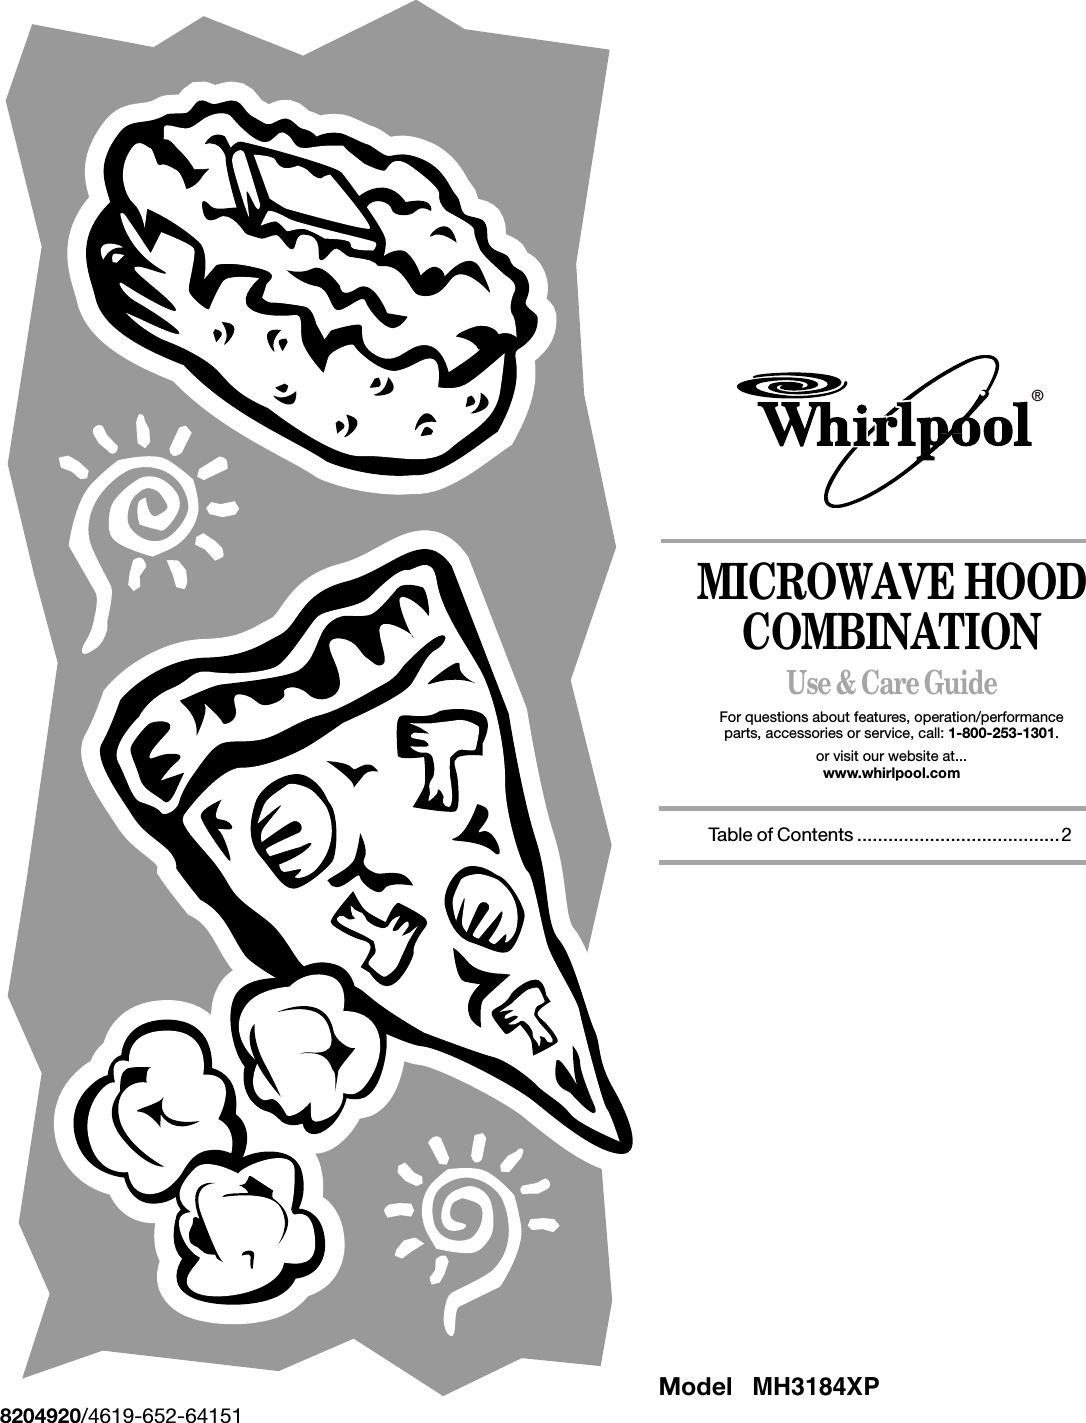 MICROWAVE HOOD COMBINATIONUse &amp; Care GuideFor questions about features, operation/performanceparts, accessories or service, call: 1-800-253-1301.or visit our website at...www.whirlpool.com      Table of Contents .......................................28204920/4619-652-64151®Model MH3184XP